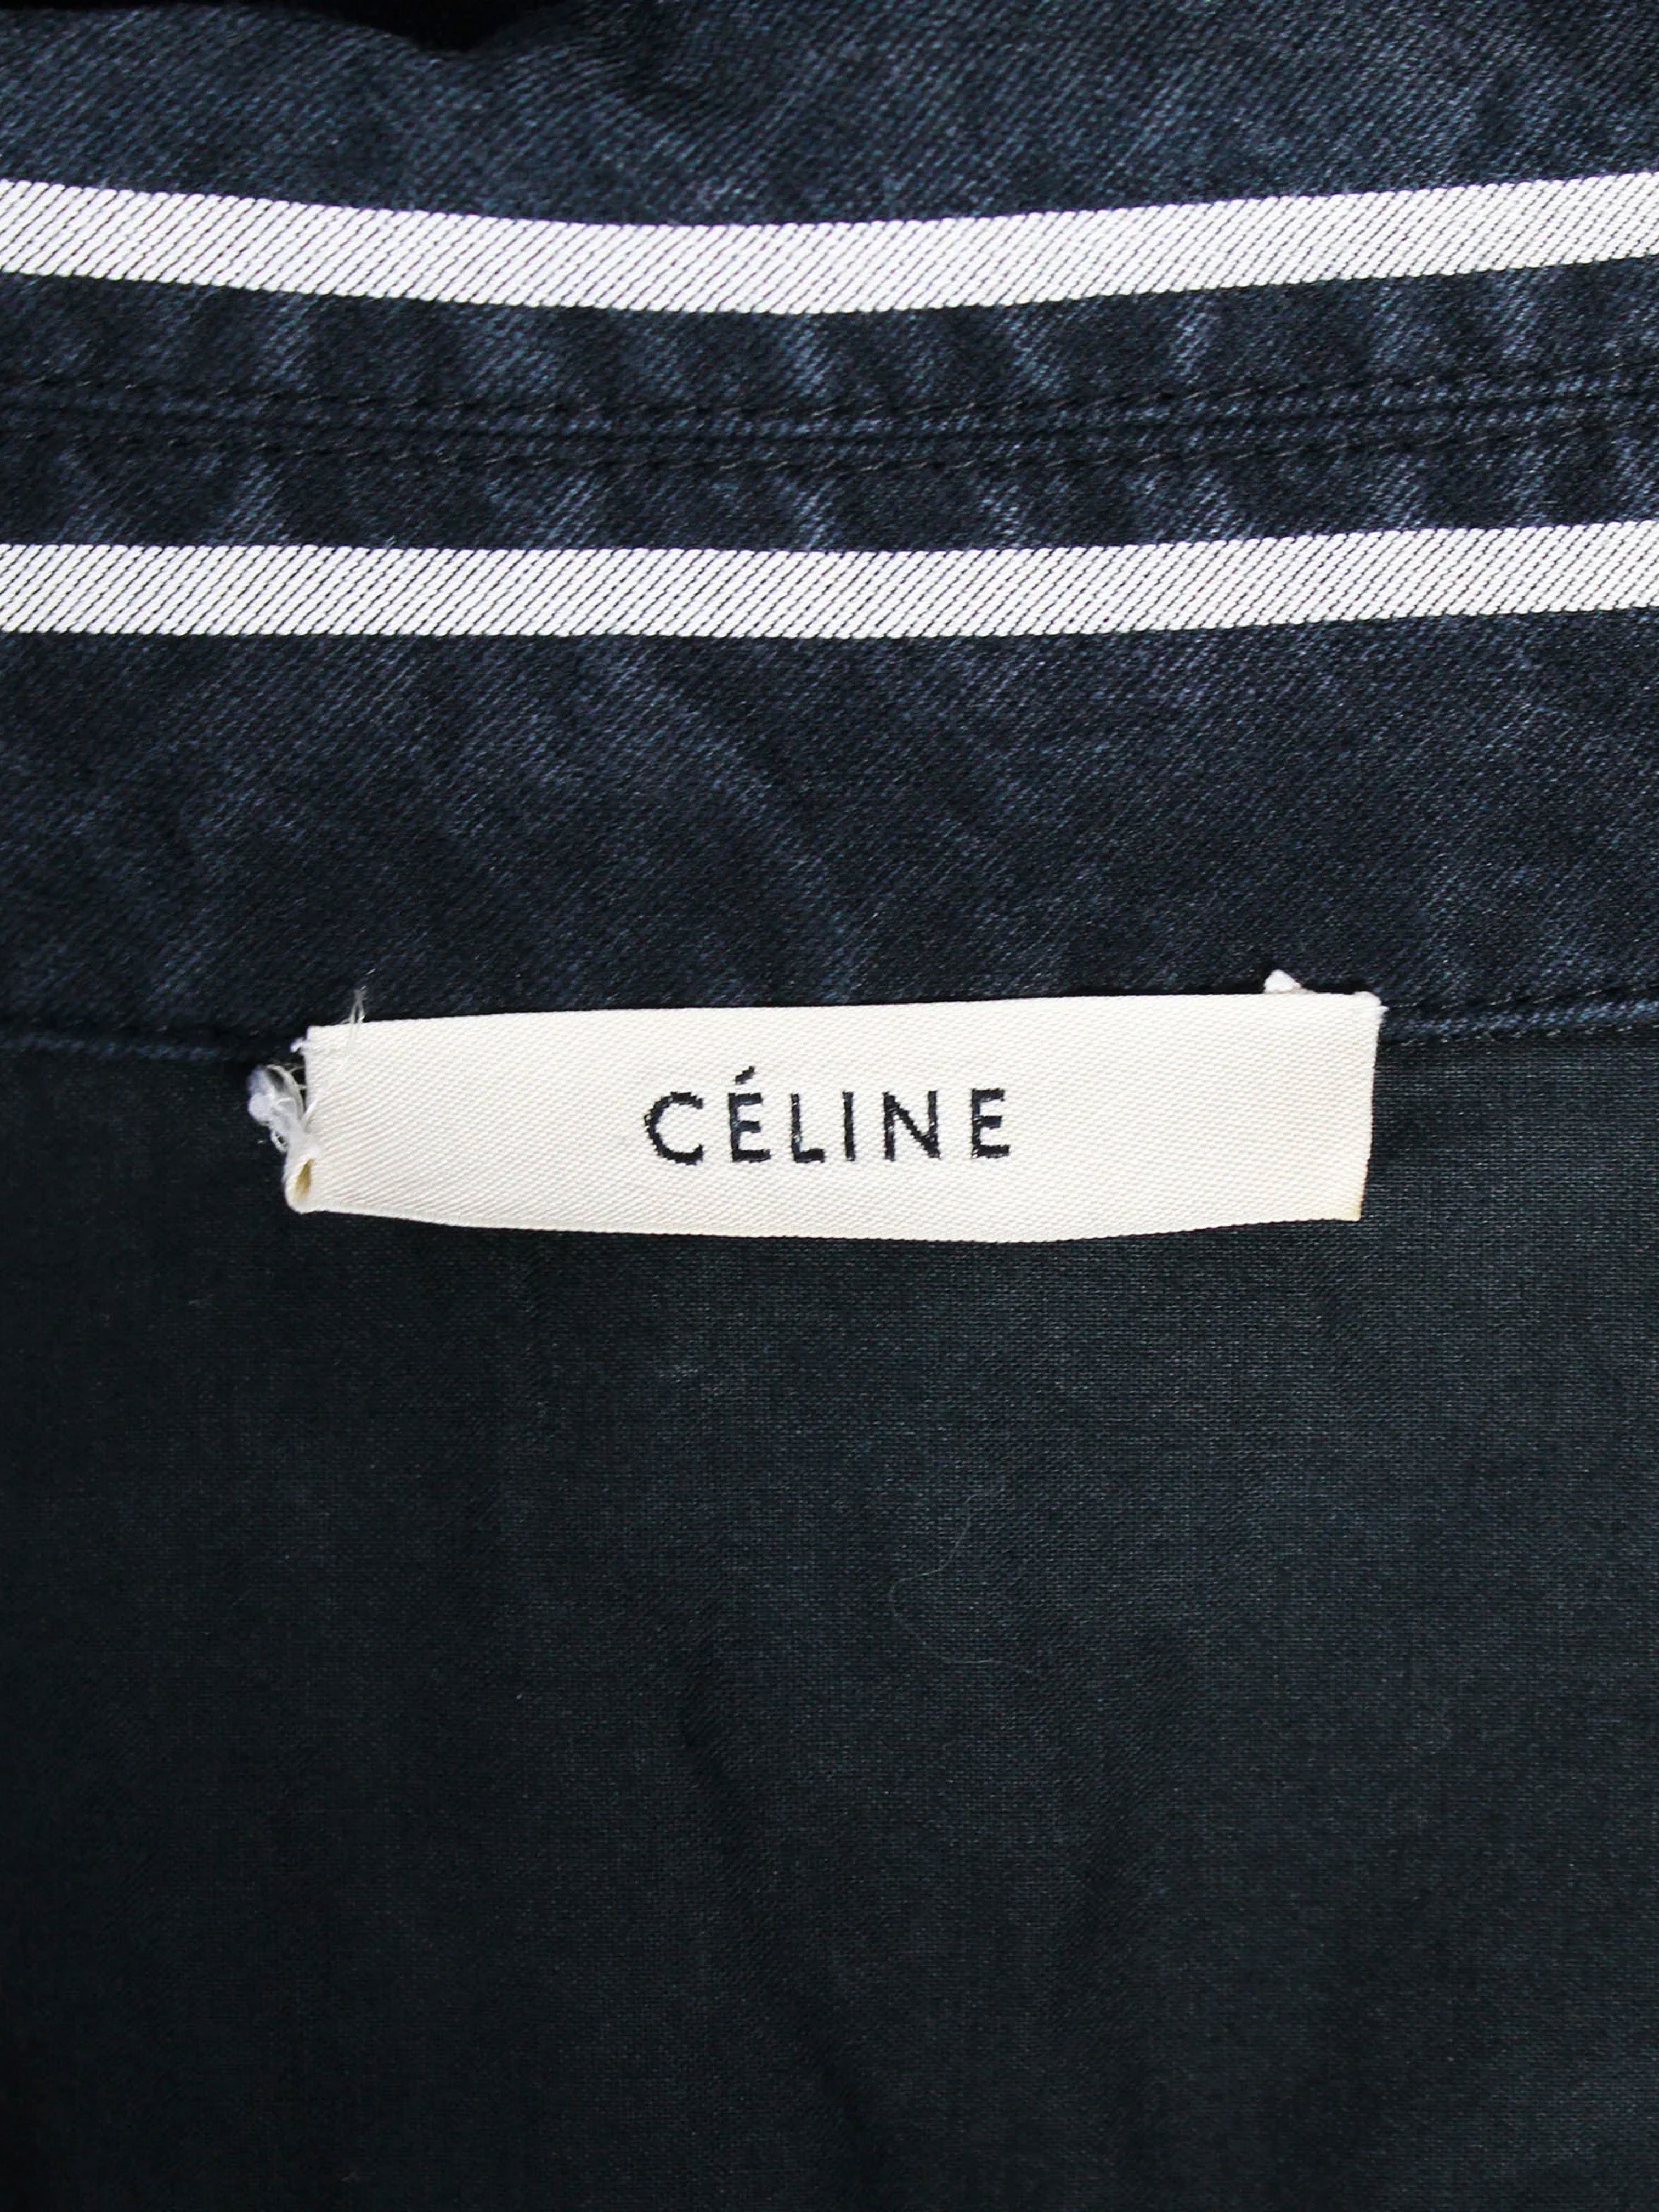 Céline by Phoebe Philo SS 2018 Navy Striped Top